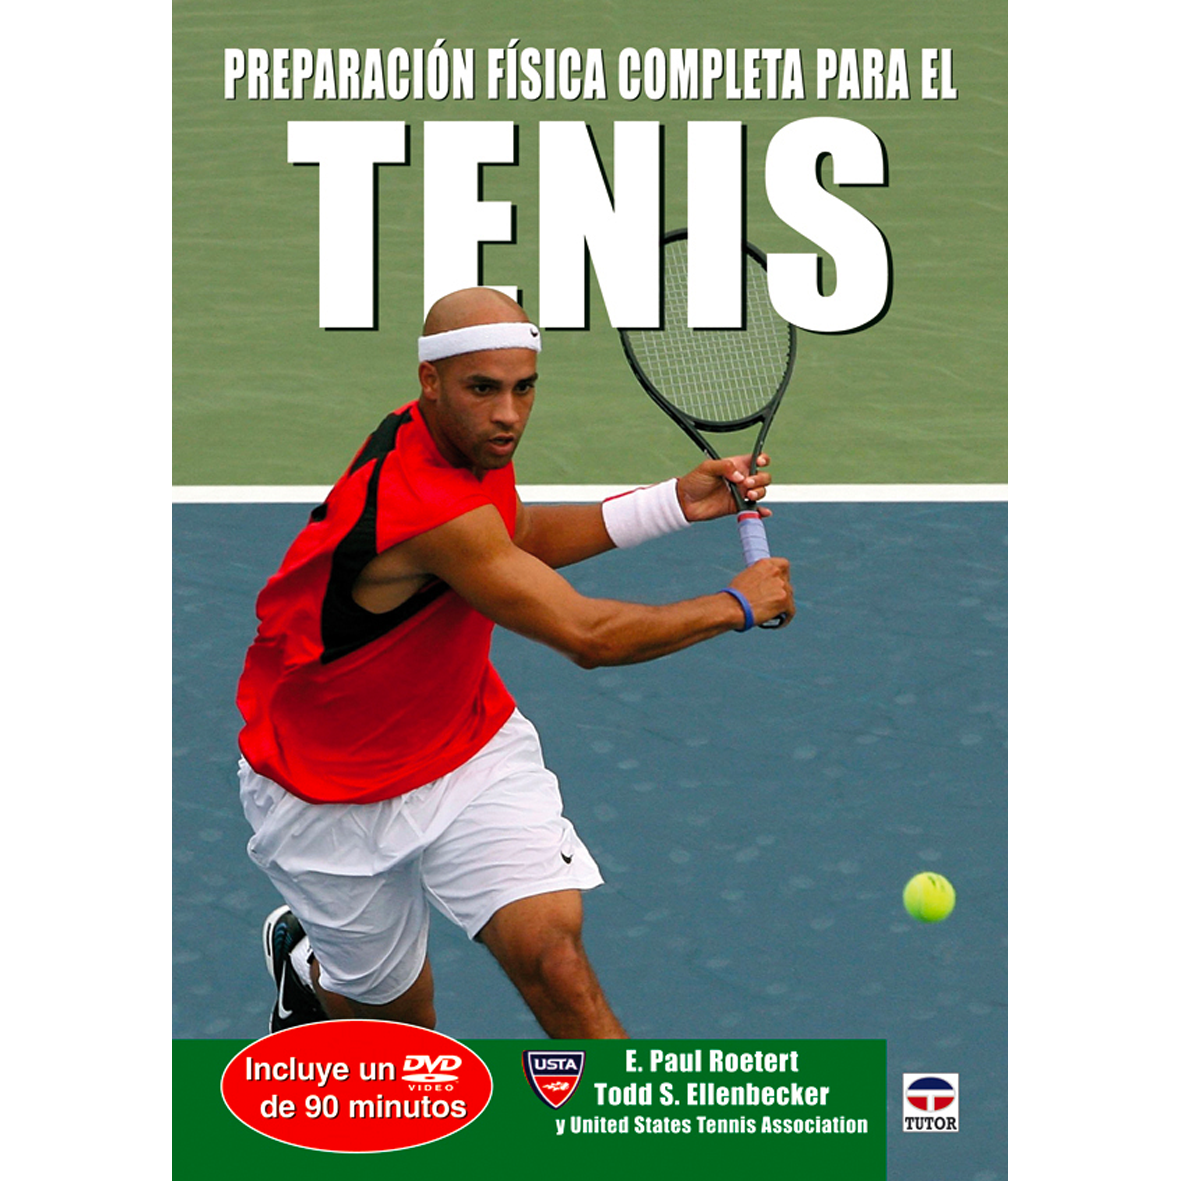 COMPLETE PHYSICAL PREPARATION FOR TENNIS (BOOK+DVD) (SPANISH).